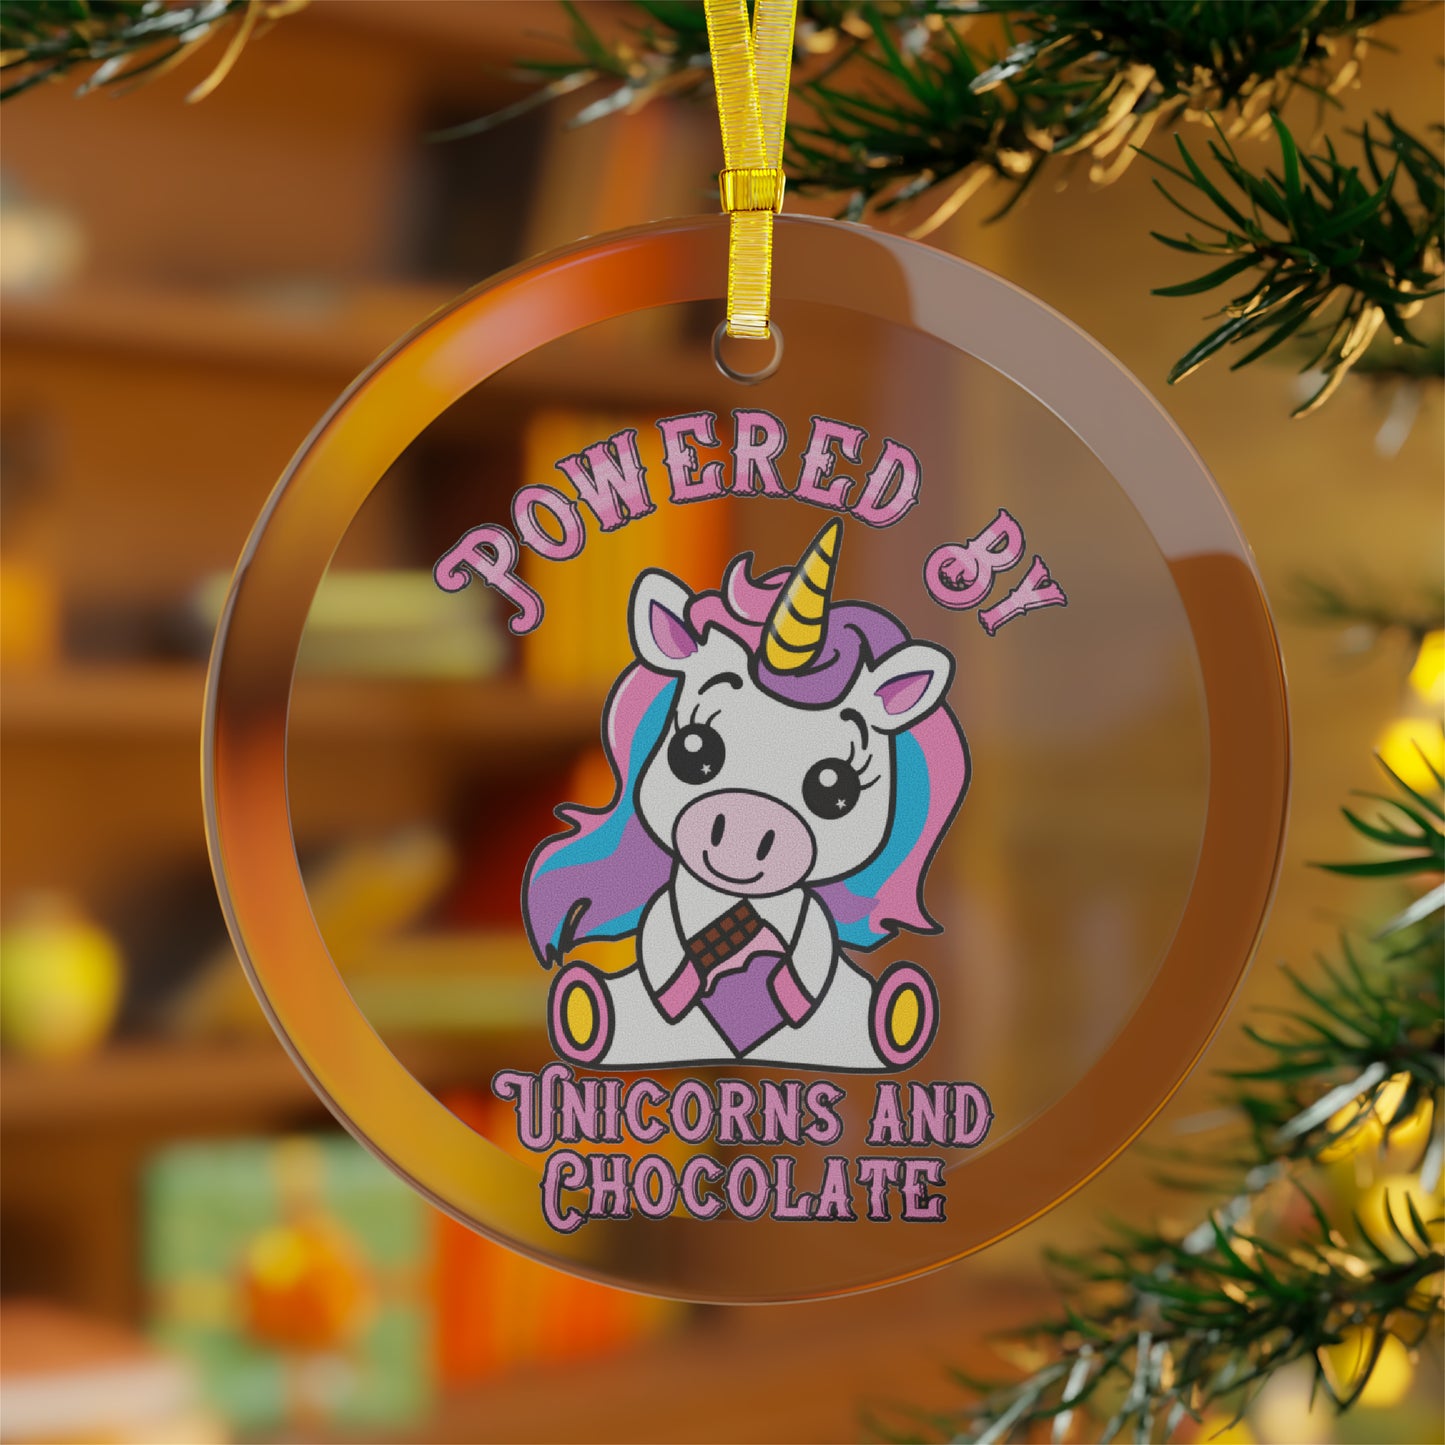 Powered by Unicorns and Chocolate Glass Ornaments